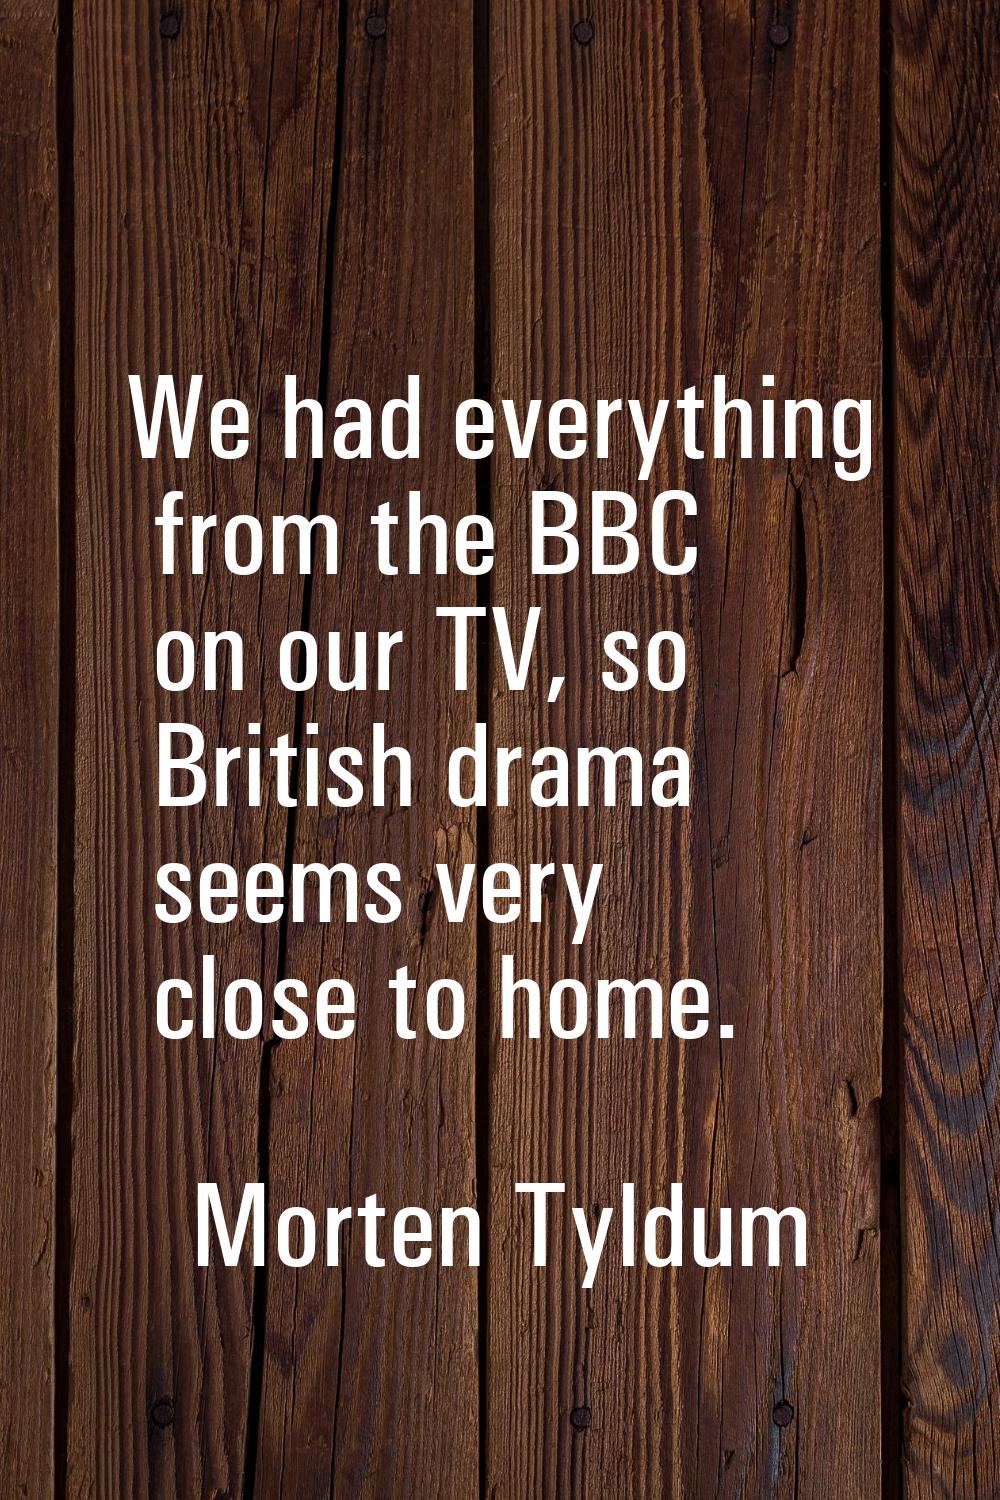 We had everything from the BBC on our TV, so British drama seems very close to home.